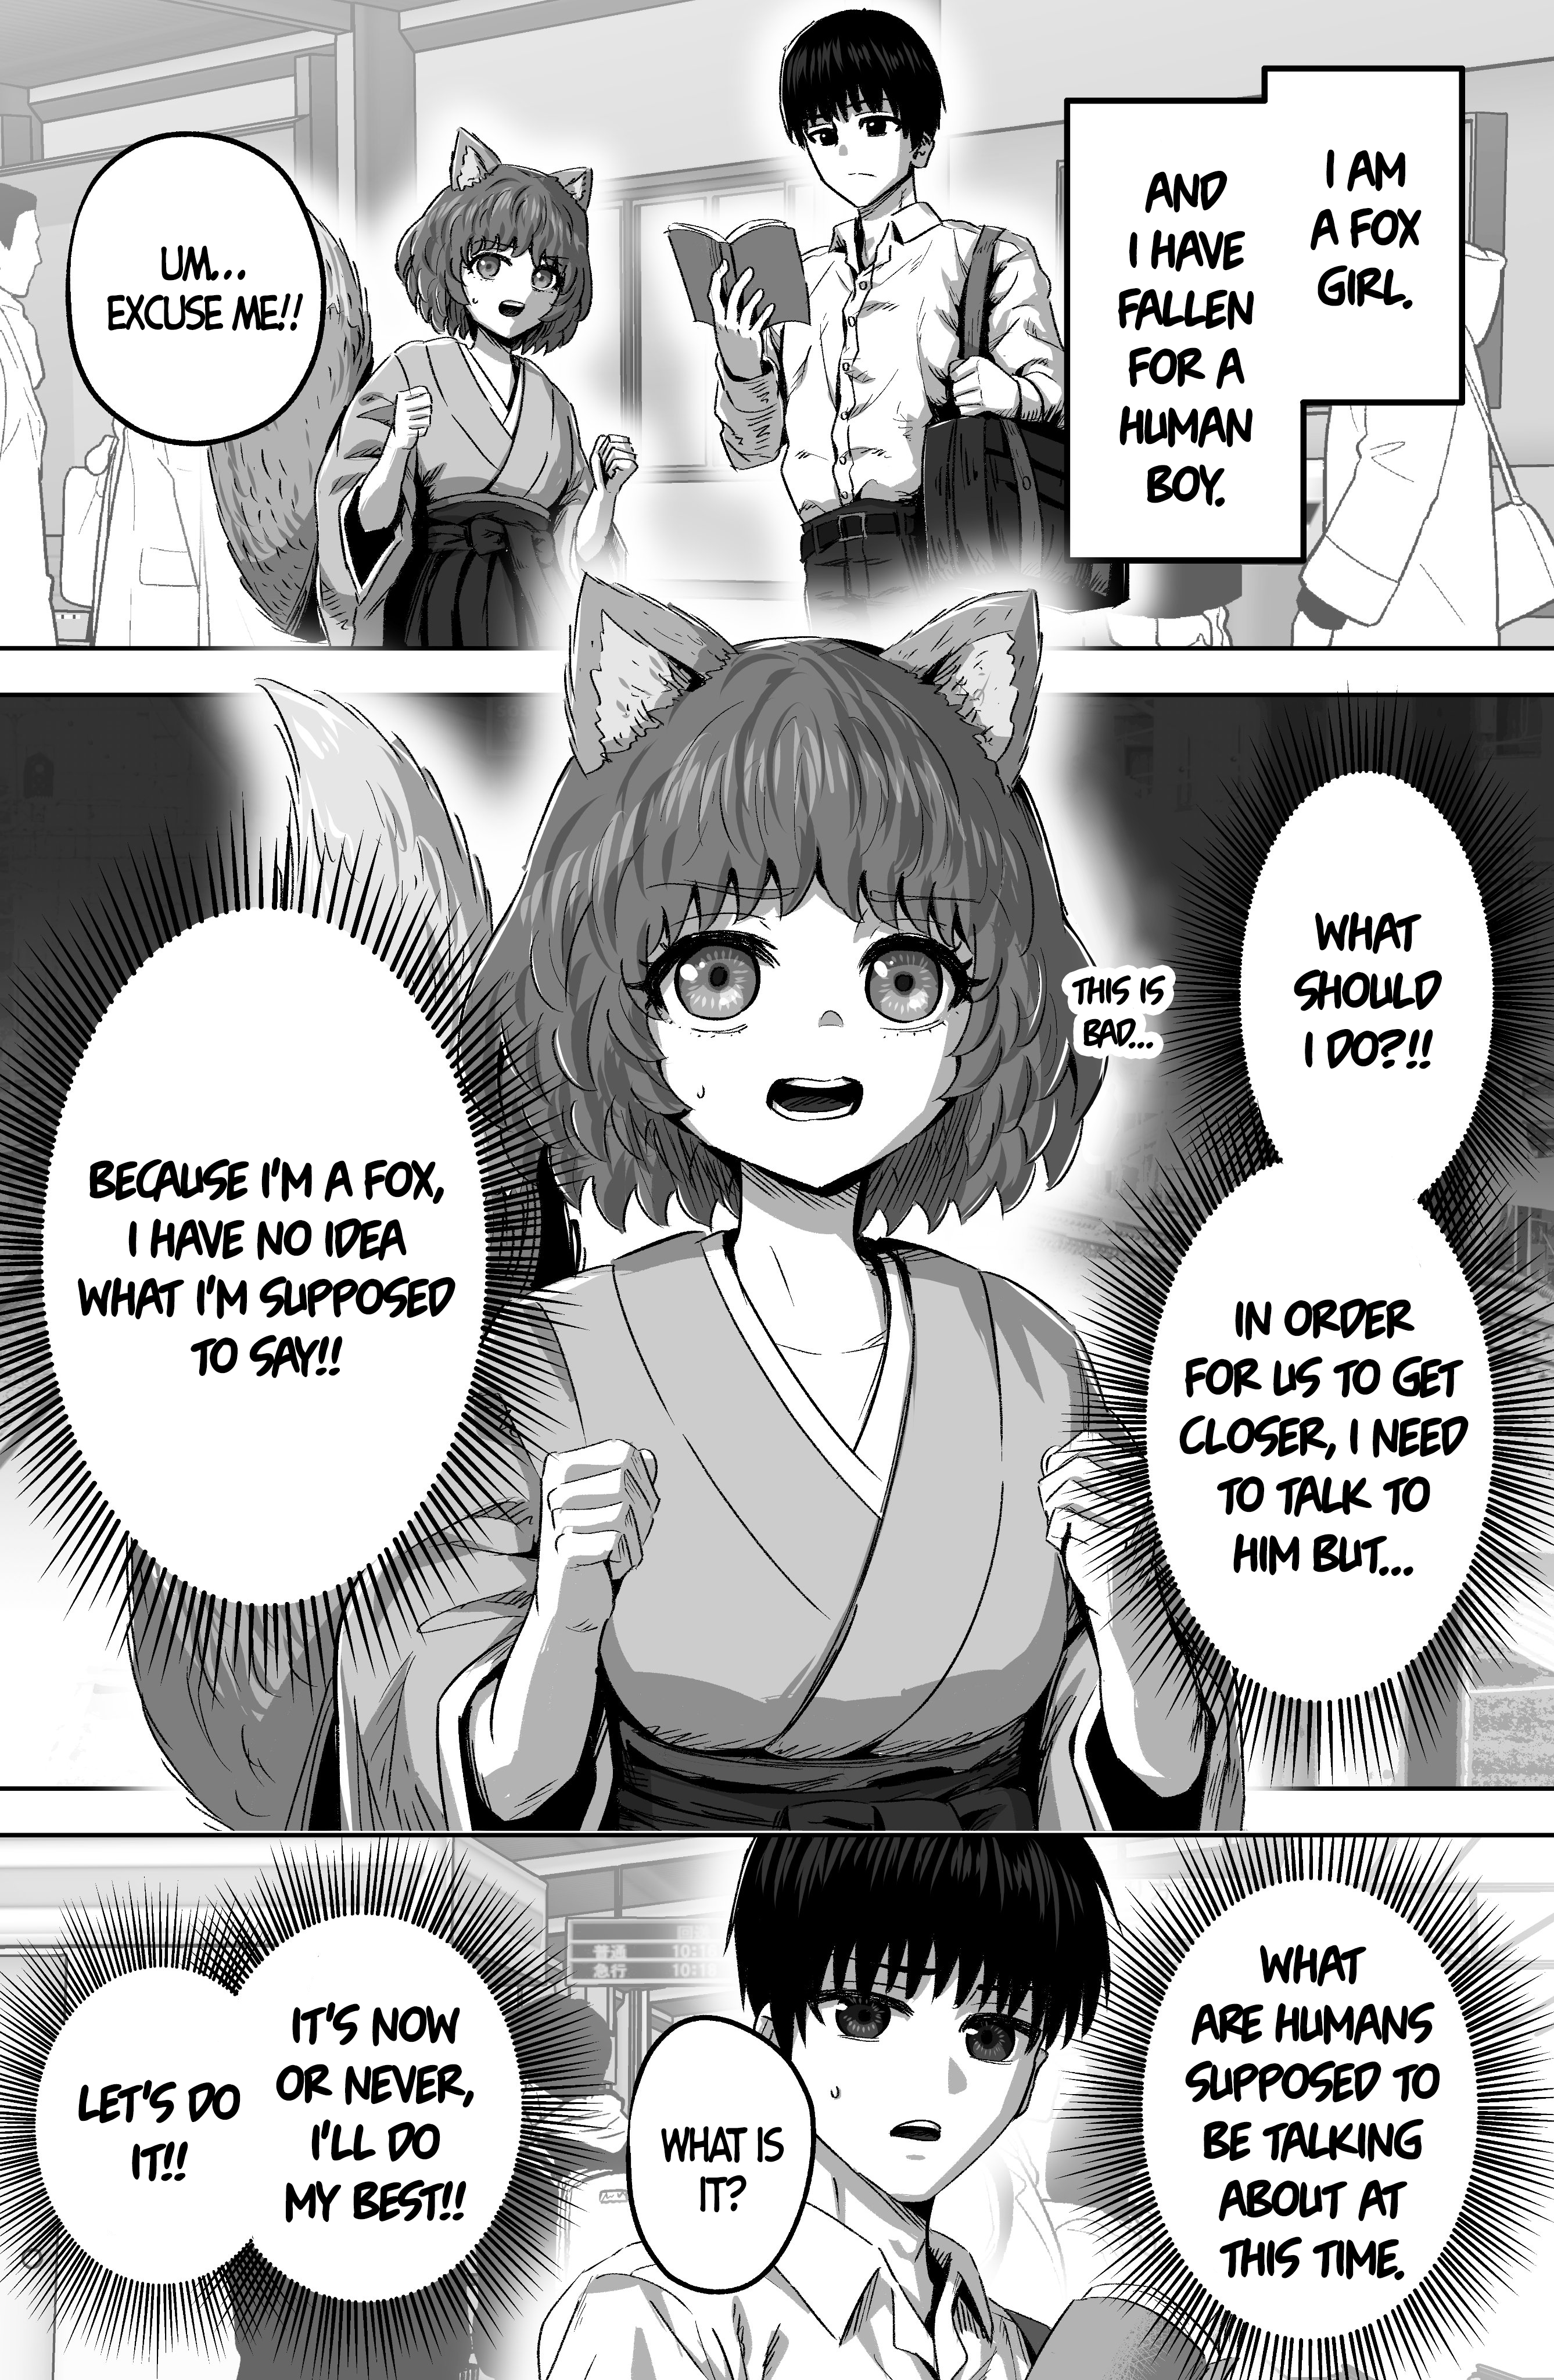 The Fox Girl Who Wants To Get Chummy With The Human Boy She Likes - Page 1